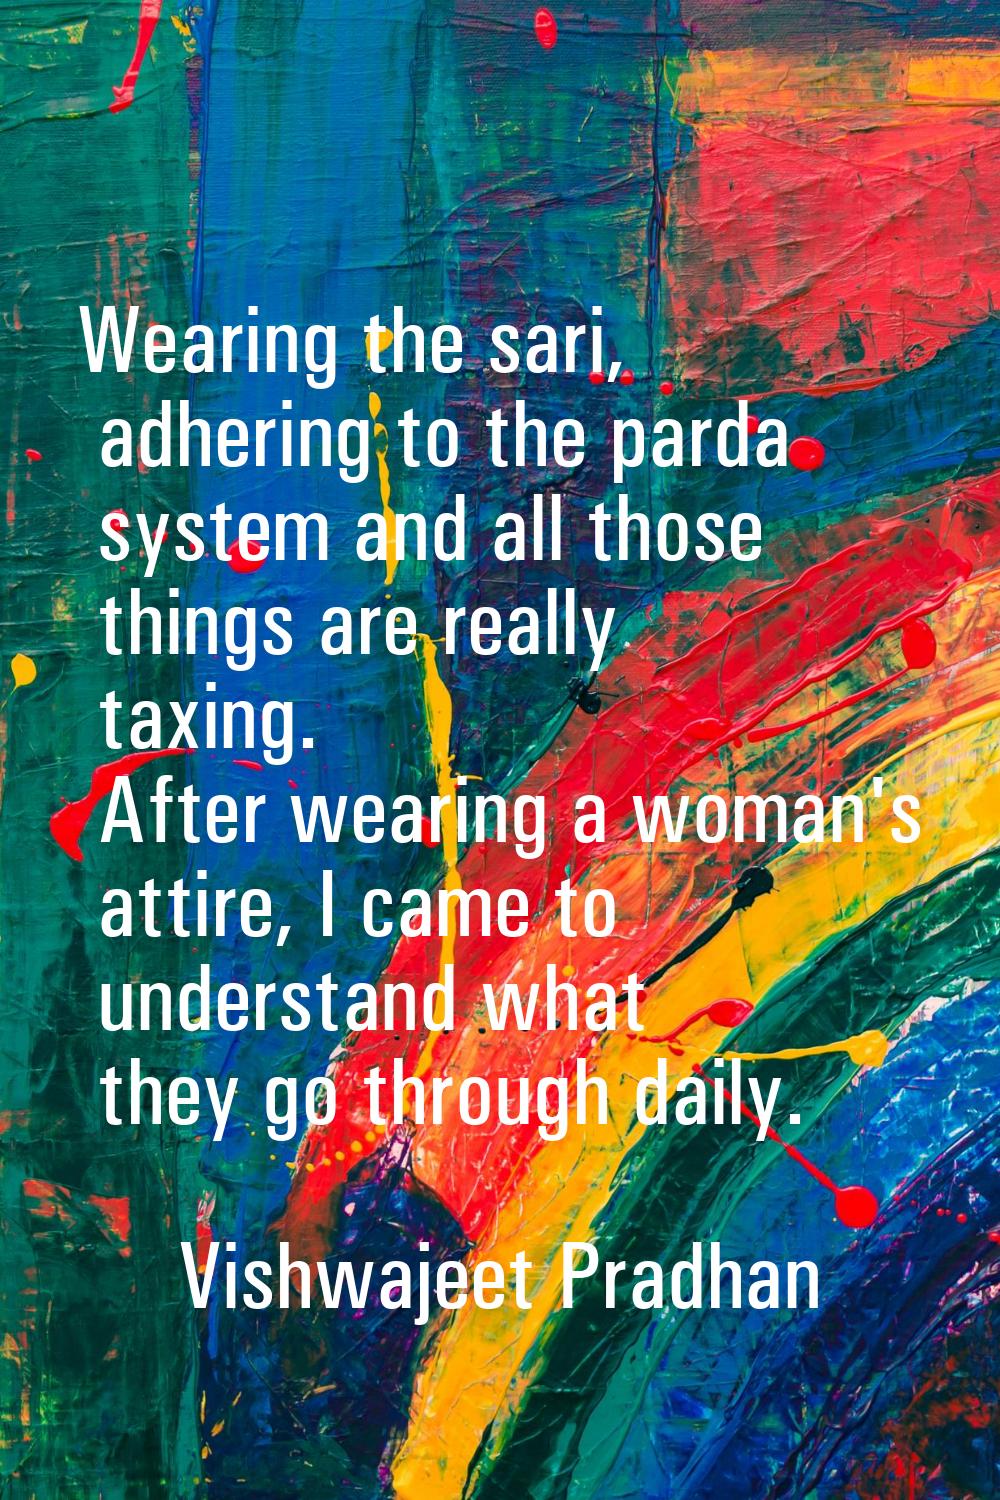 Wearing the sari, adhering to the parda system and all those things are really taxing. After wearin